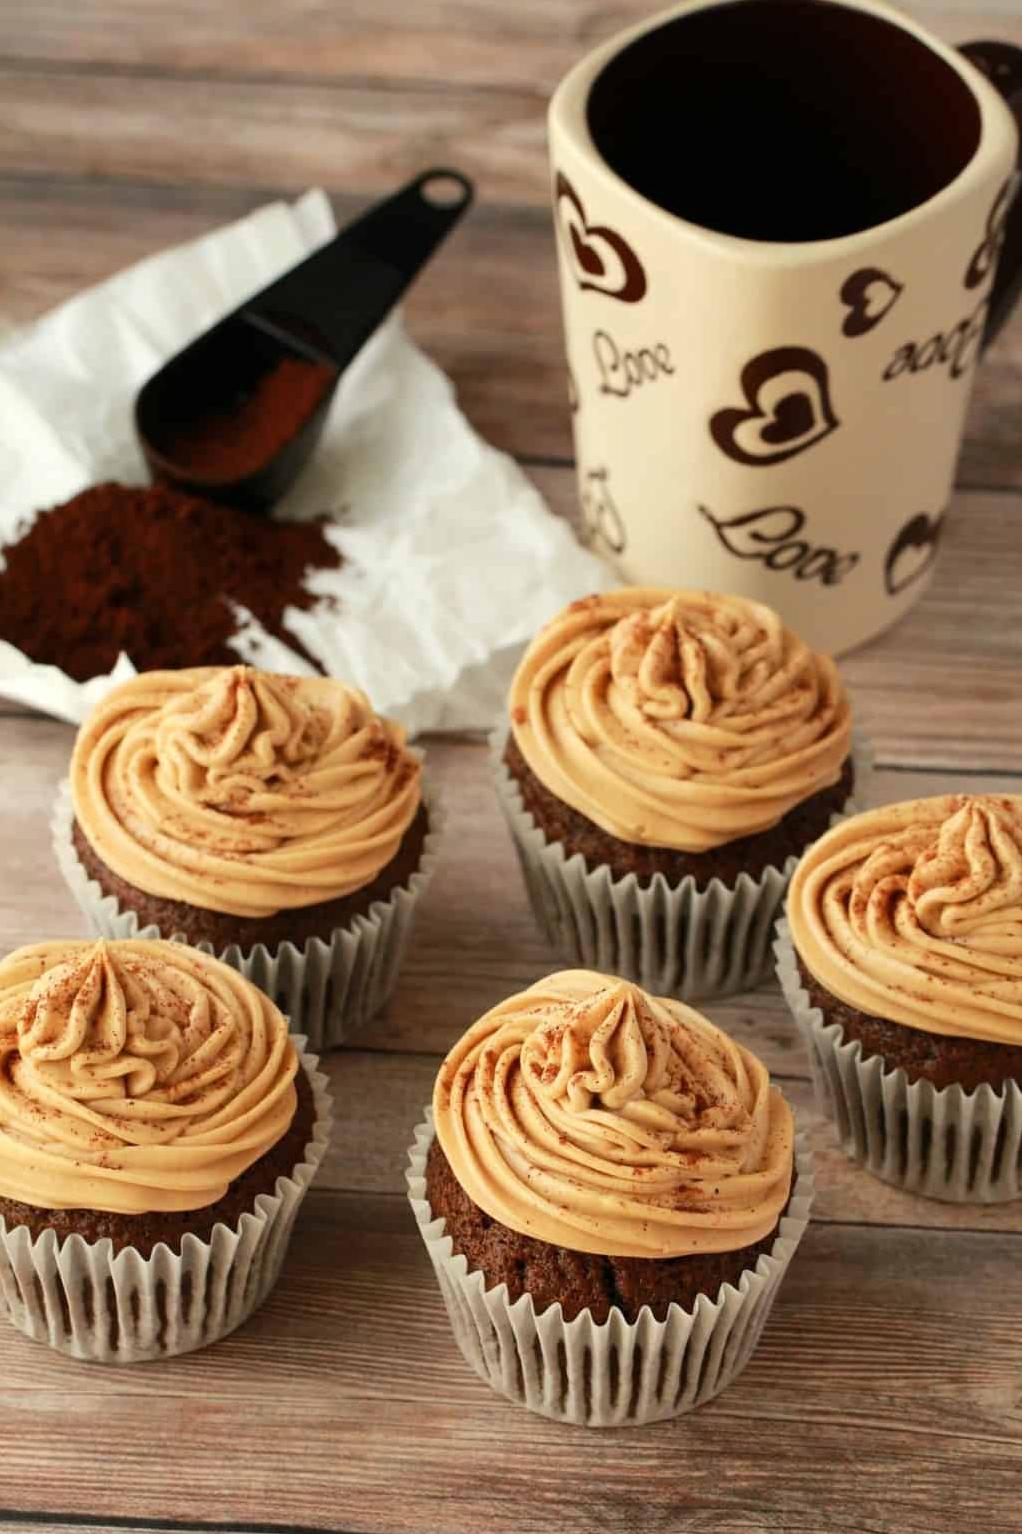  Enjoy every dollop of this decadent coffee-buttercream frosting.